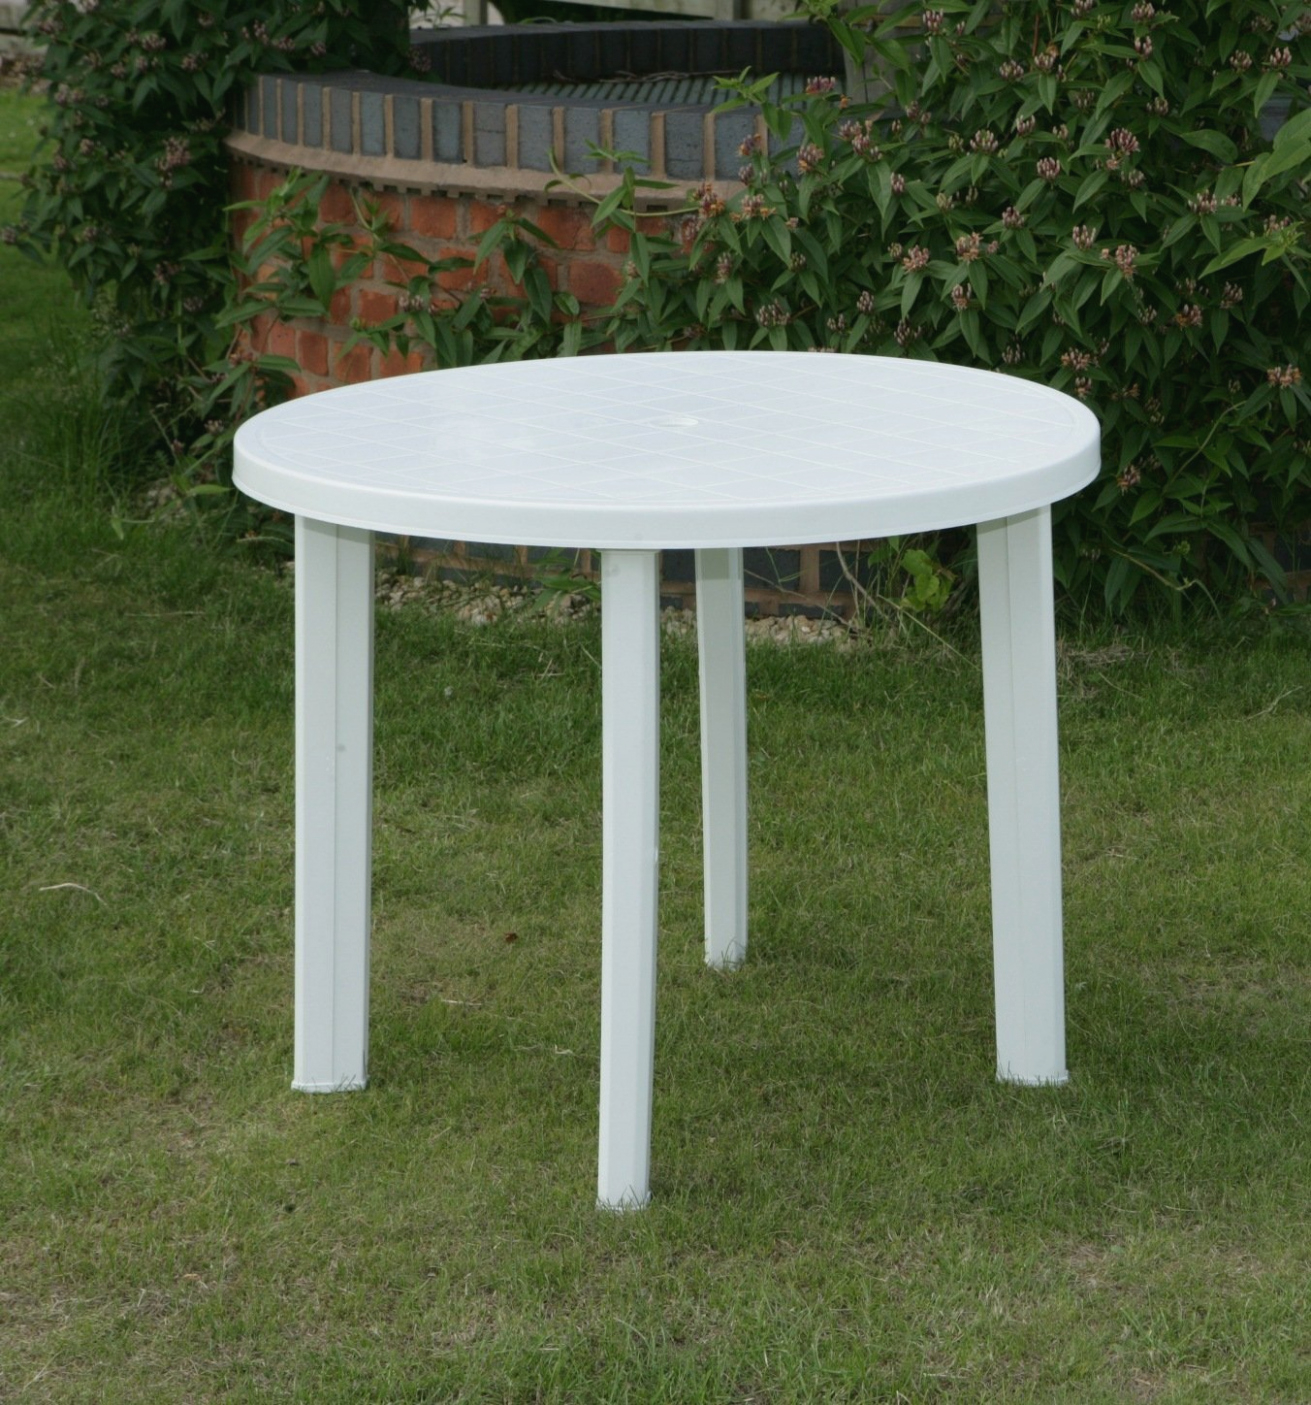 plastic garden table classy resin plastic patio furniture for your residence idea: round garden PNJOKBY